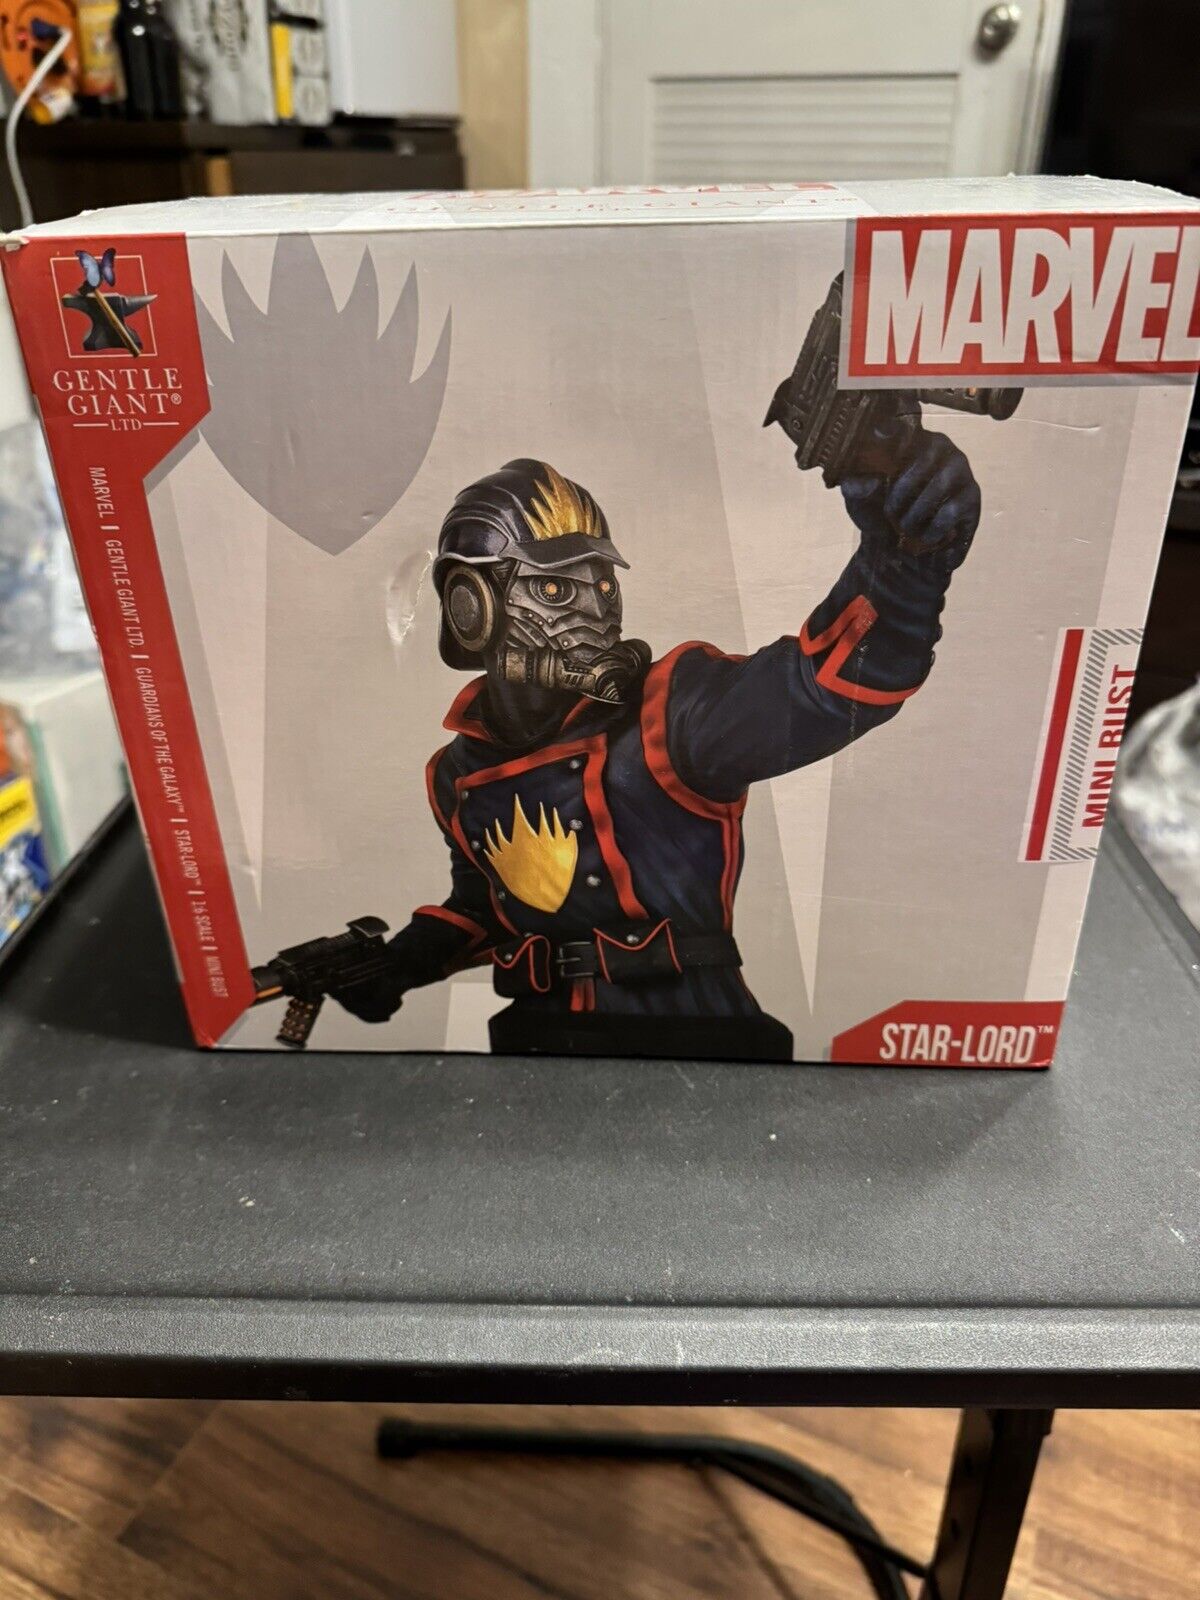 Gentle Giant Star-Lord Mini Bust Guardians of the Galaxy Marvel